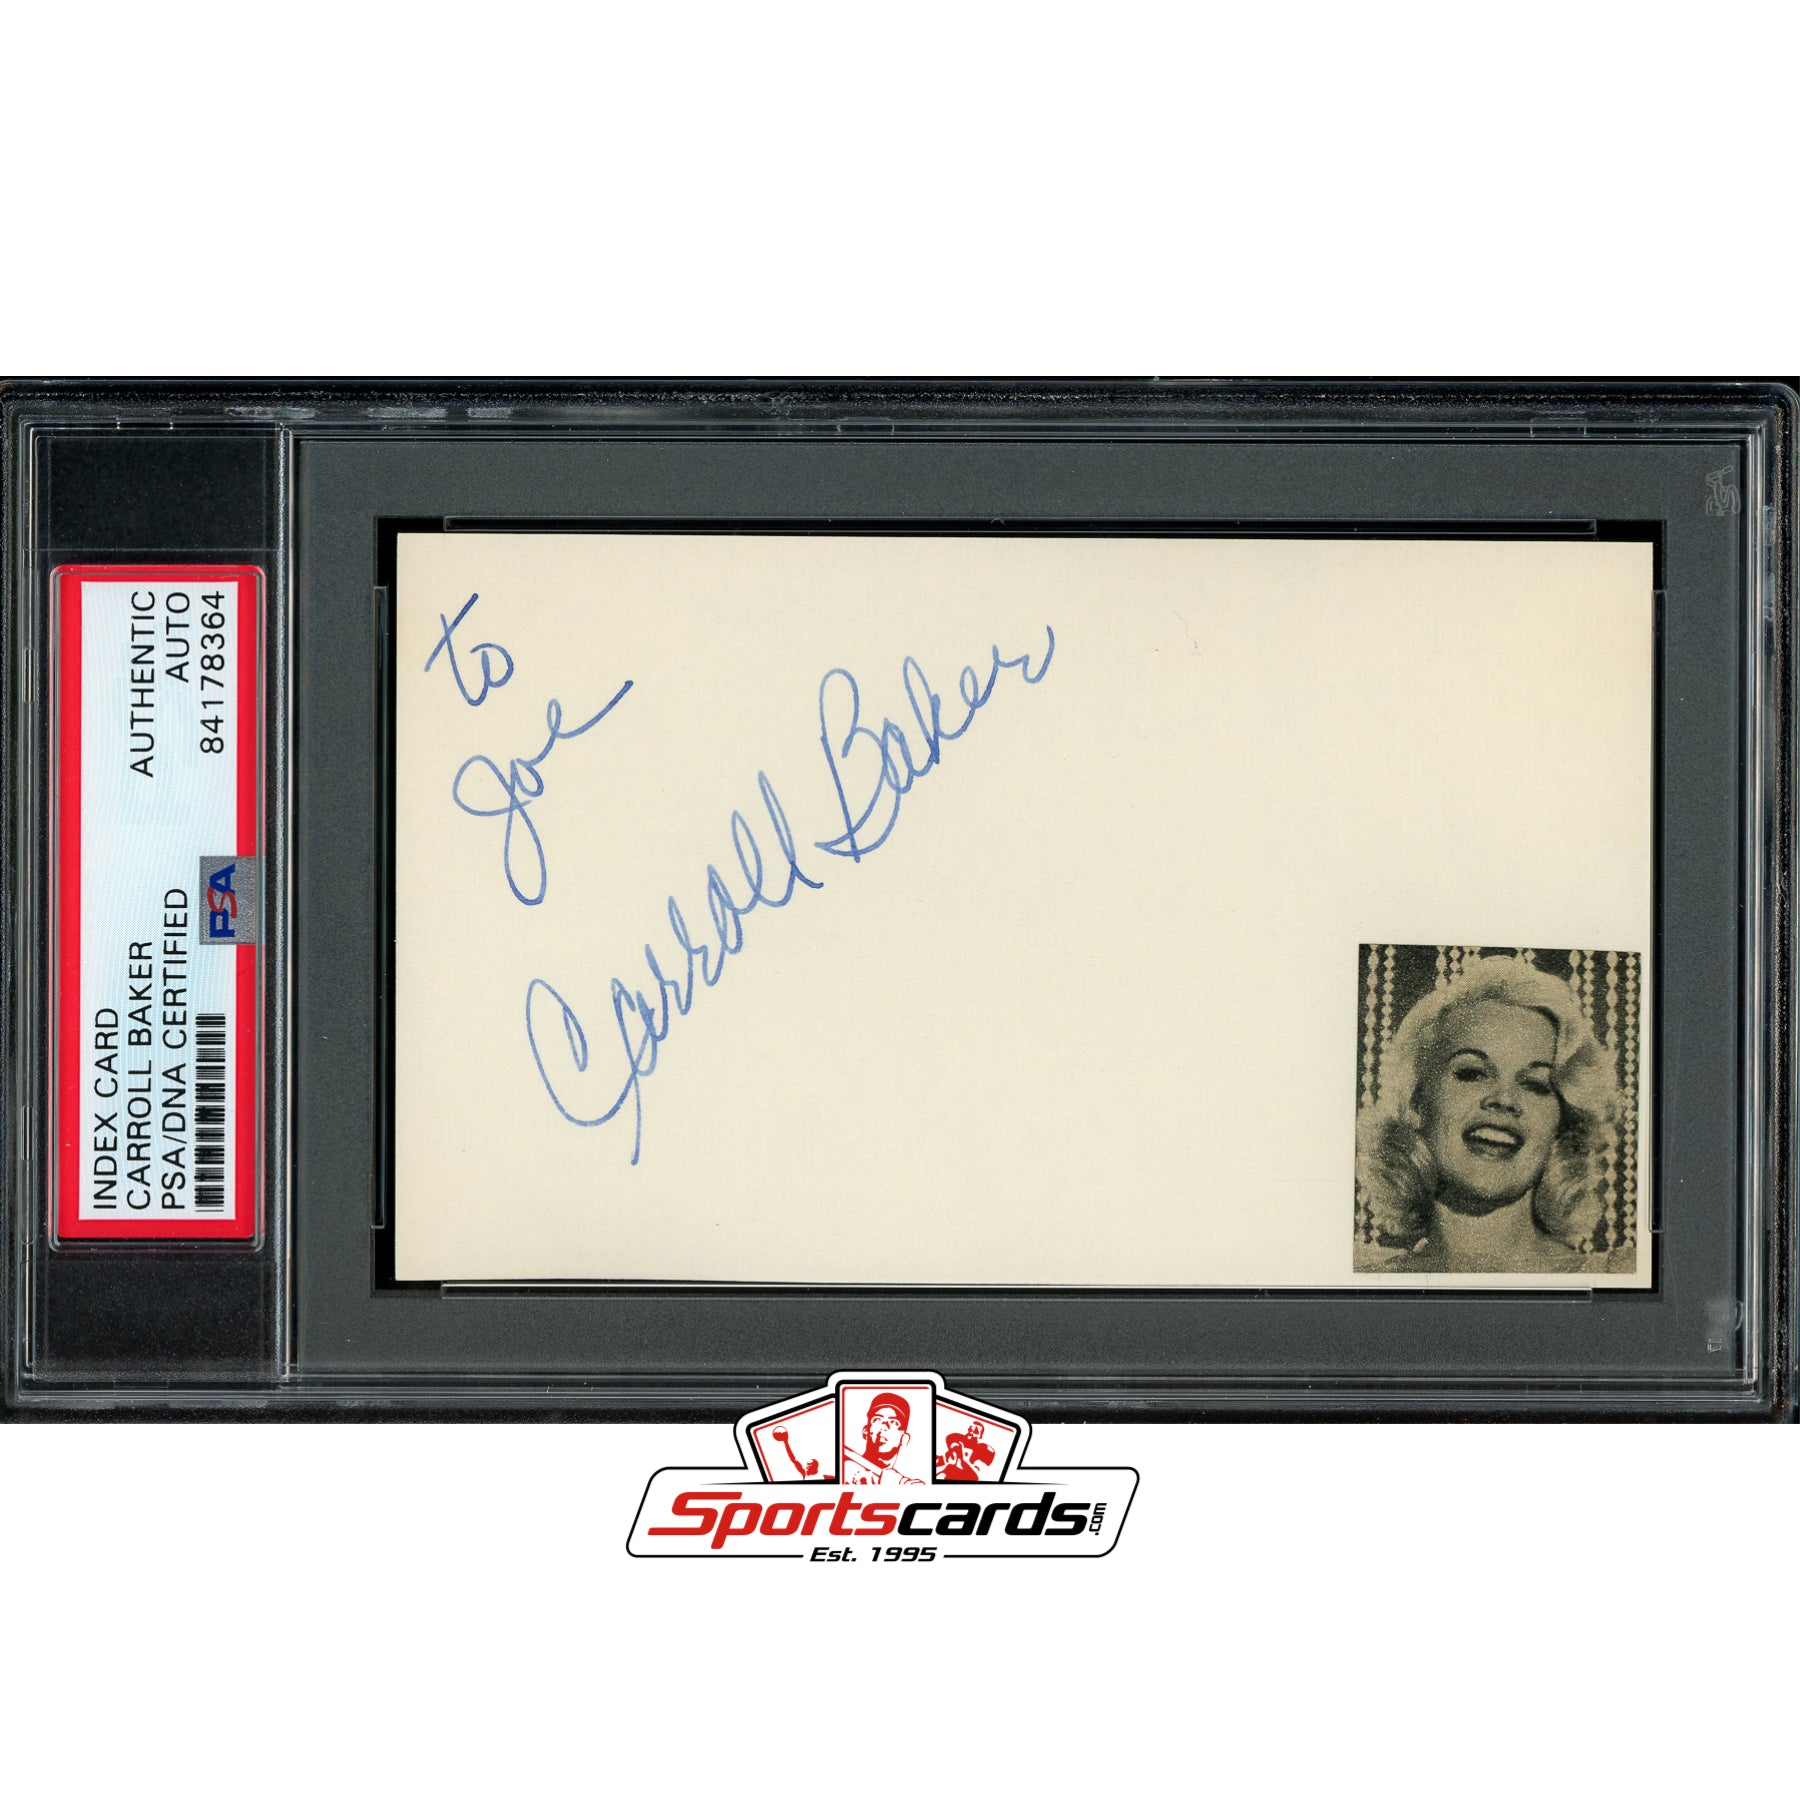 Carroll Baker Signed Auto 3x5 Index Card PSA/DNA Actress Baby Doll